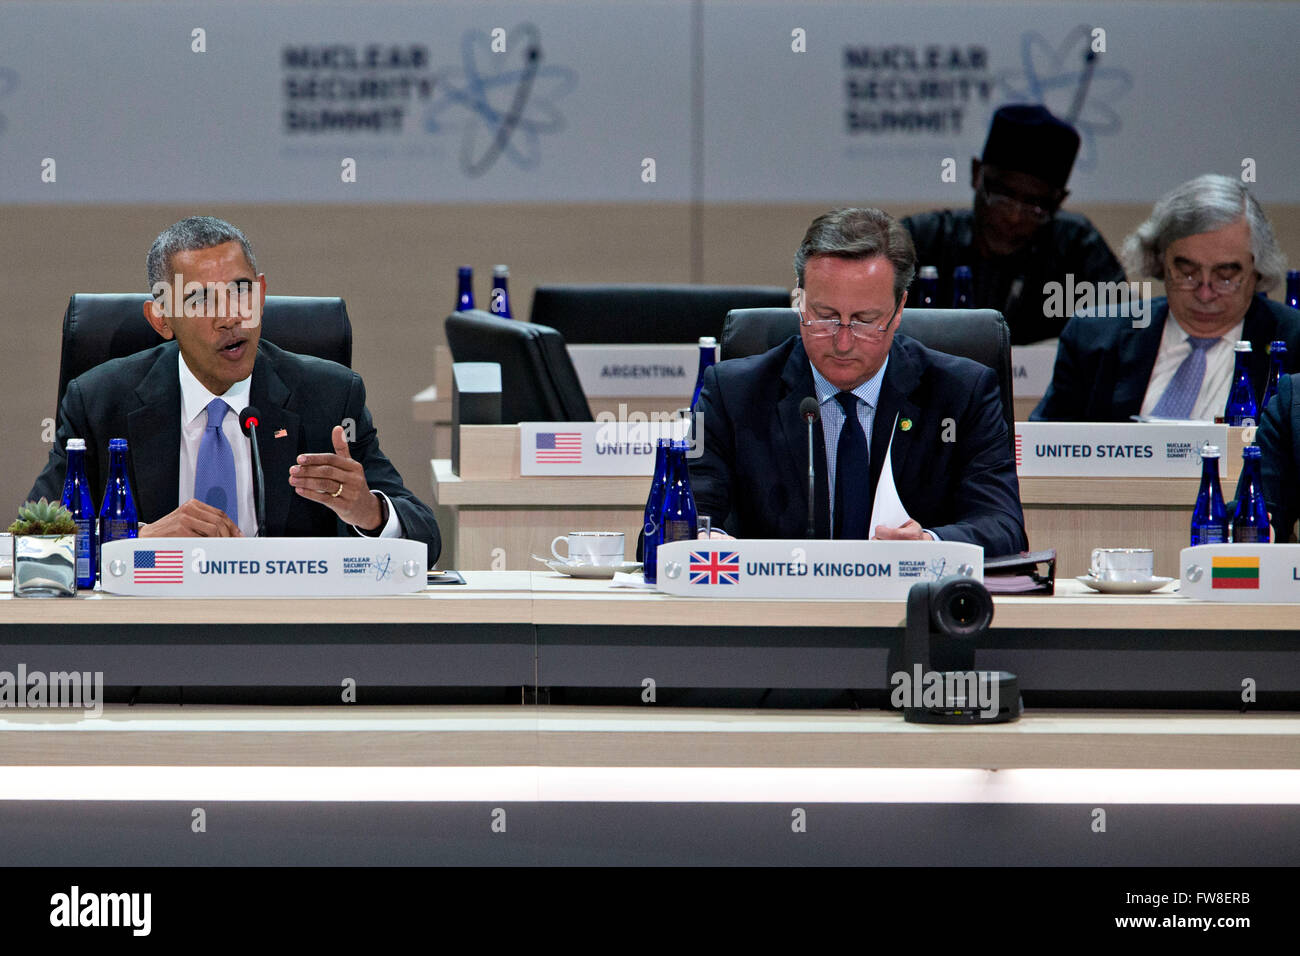 Washington, DC, USA. 1st Apr, 2016. United States President Barack Obama, left, speaks during a closing session with David Cameron, U.K. prime minister, at the Nuclear Security Summit in Washington, DC, U.S., on Friday, April 1, 2016. After a spate of terrorist attacks from Europe to Africa, Obama is rallying international support during the summit for an effort to keep Islamic State and similar groups from obtaining nuclear material and other weapons of mass destruction. Credit: Andrew Harrer/Pool via CNP - NO WIRE SERVICE - © dpa/Alamy Live News Stock Photo